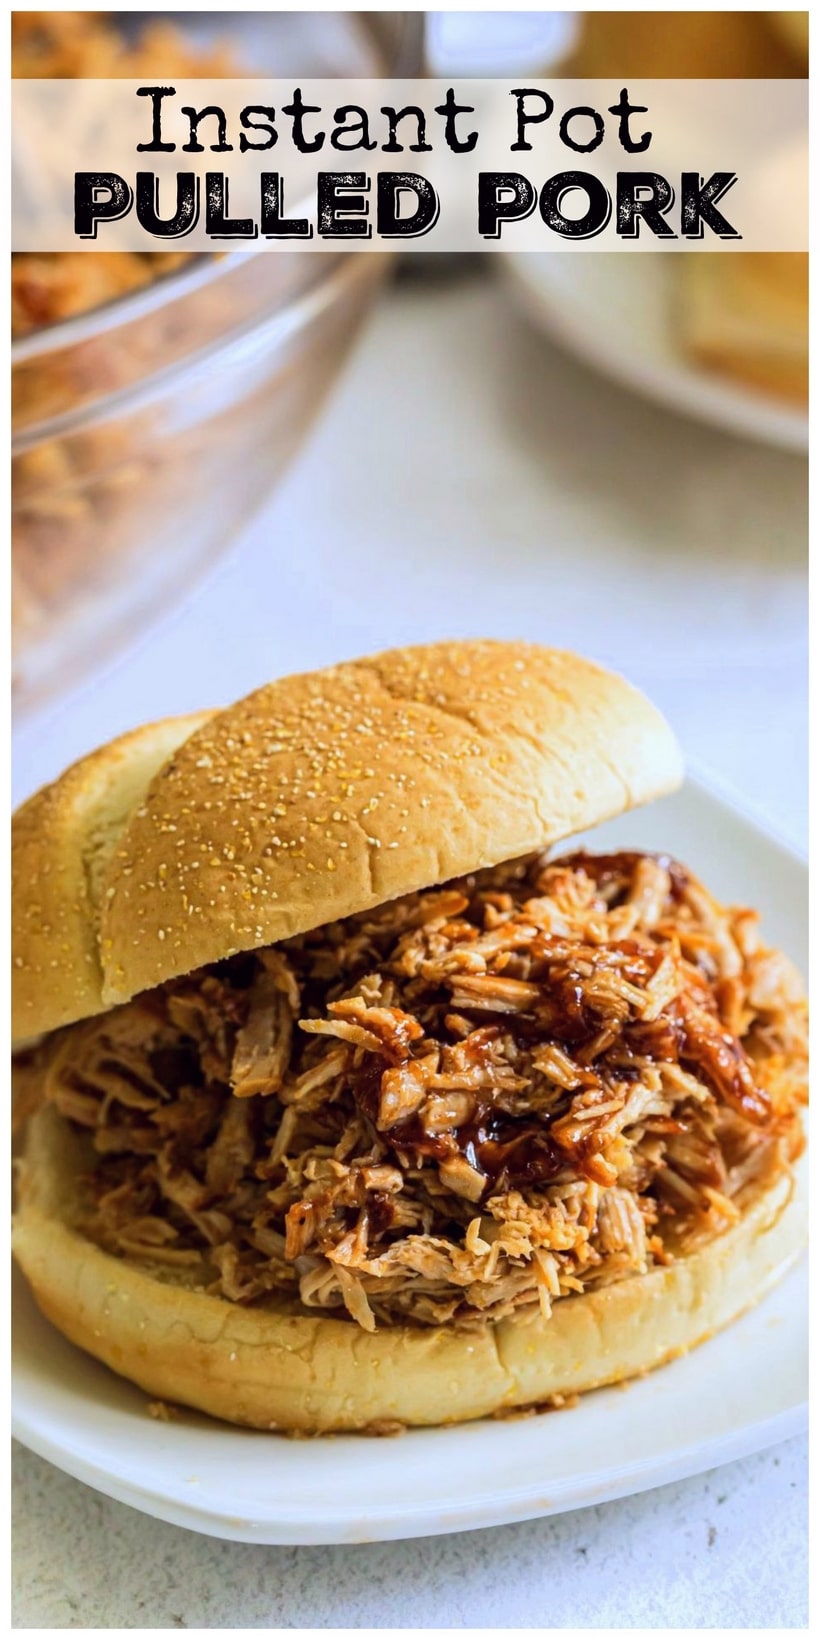 Instant Pot Pulled Pork with barbecue sauce is made to be piled high on your favorite bun. This flavor-packed pulled pork is fall-apart tender and will be ready in no-time for dinner tonight. via @cmpollak1